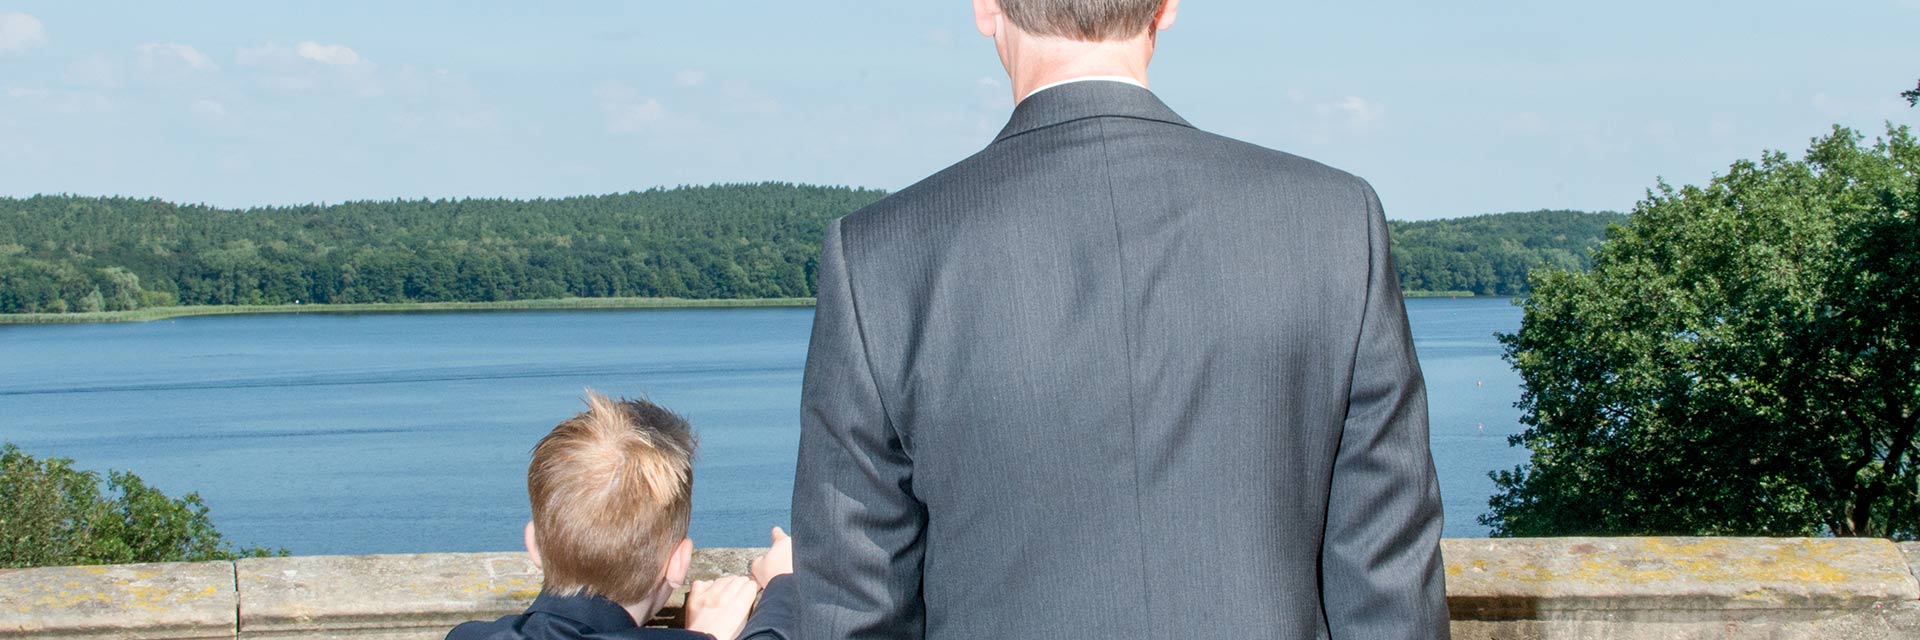 A man and his son, both in suits, look out over a body of water.